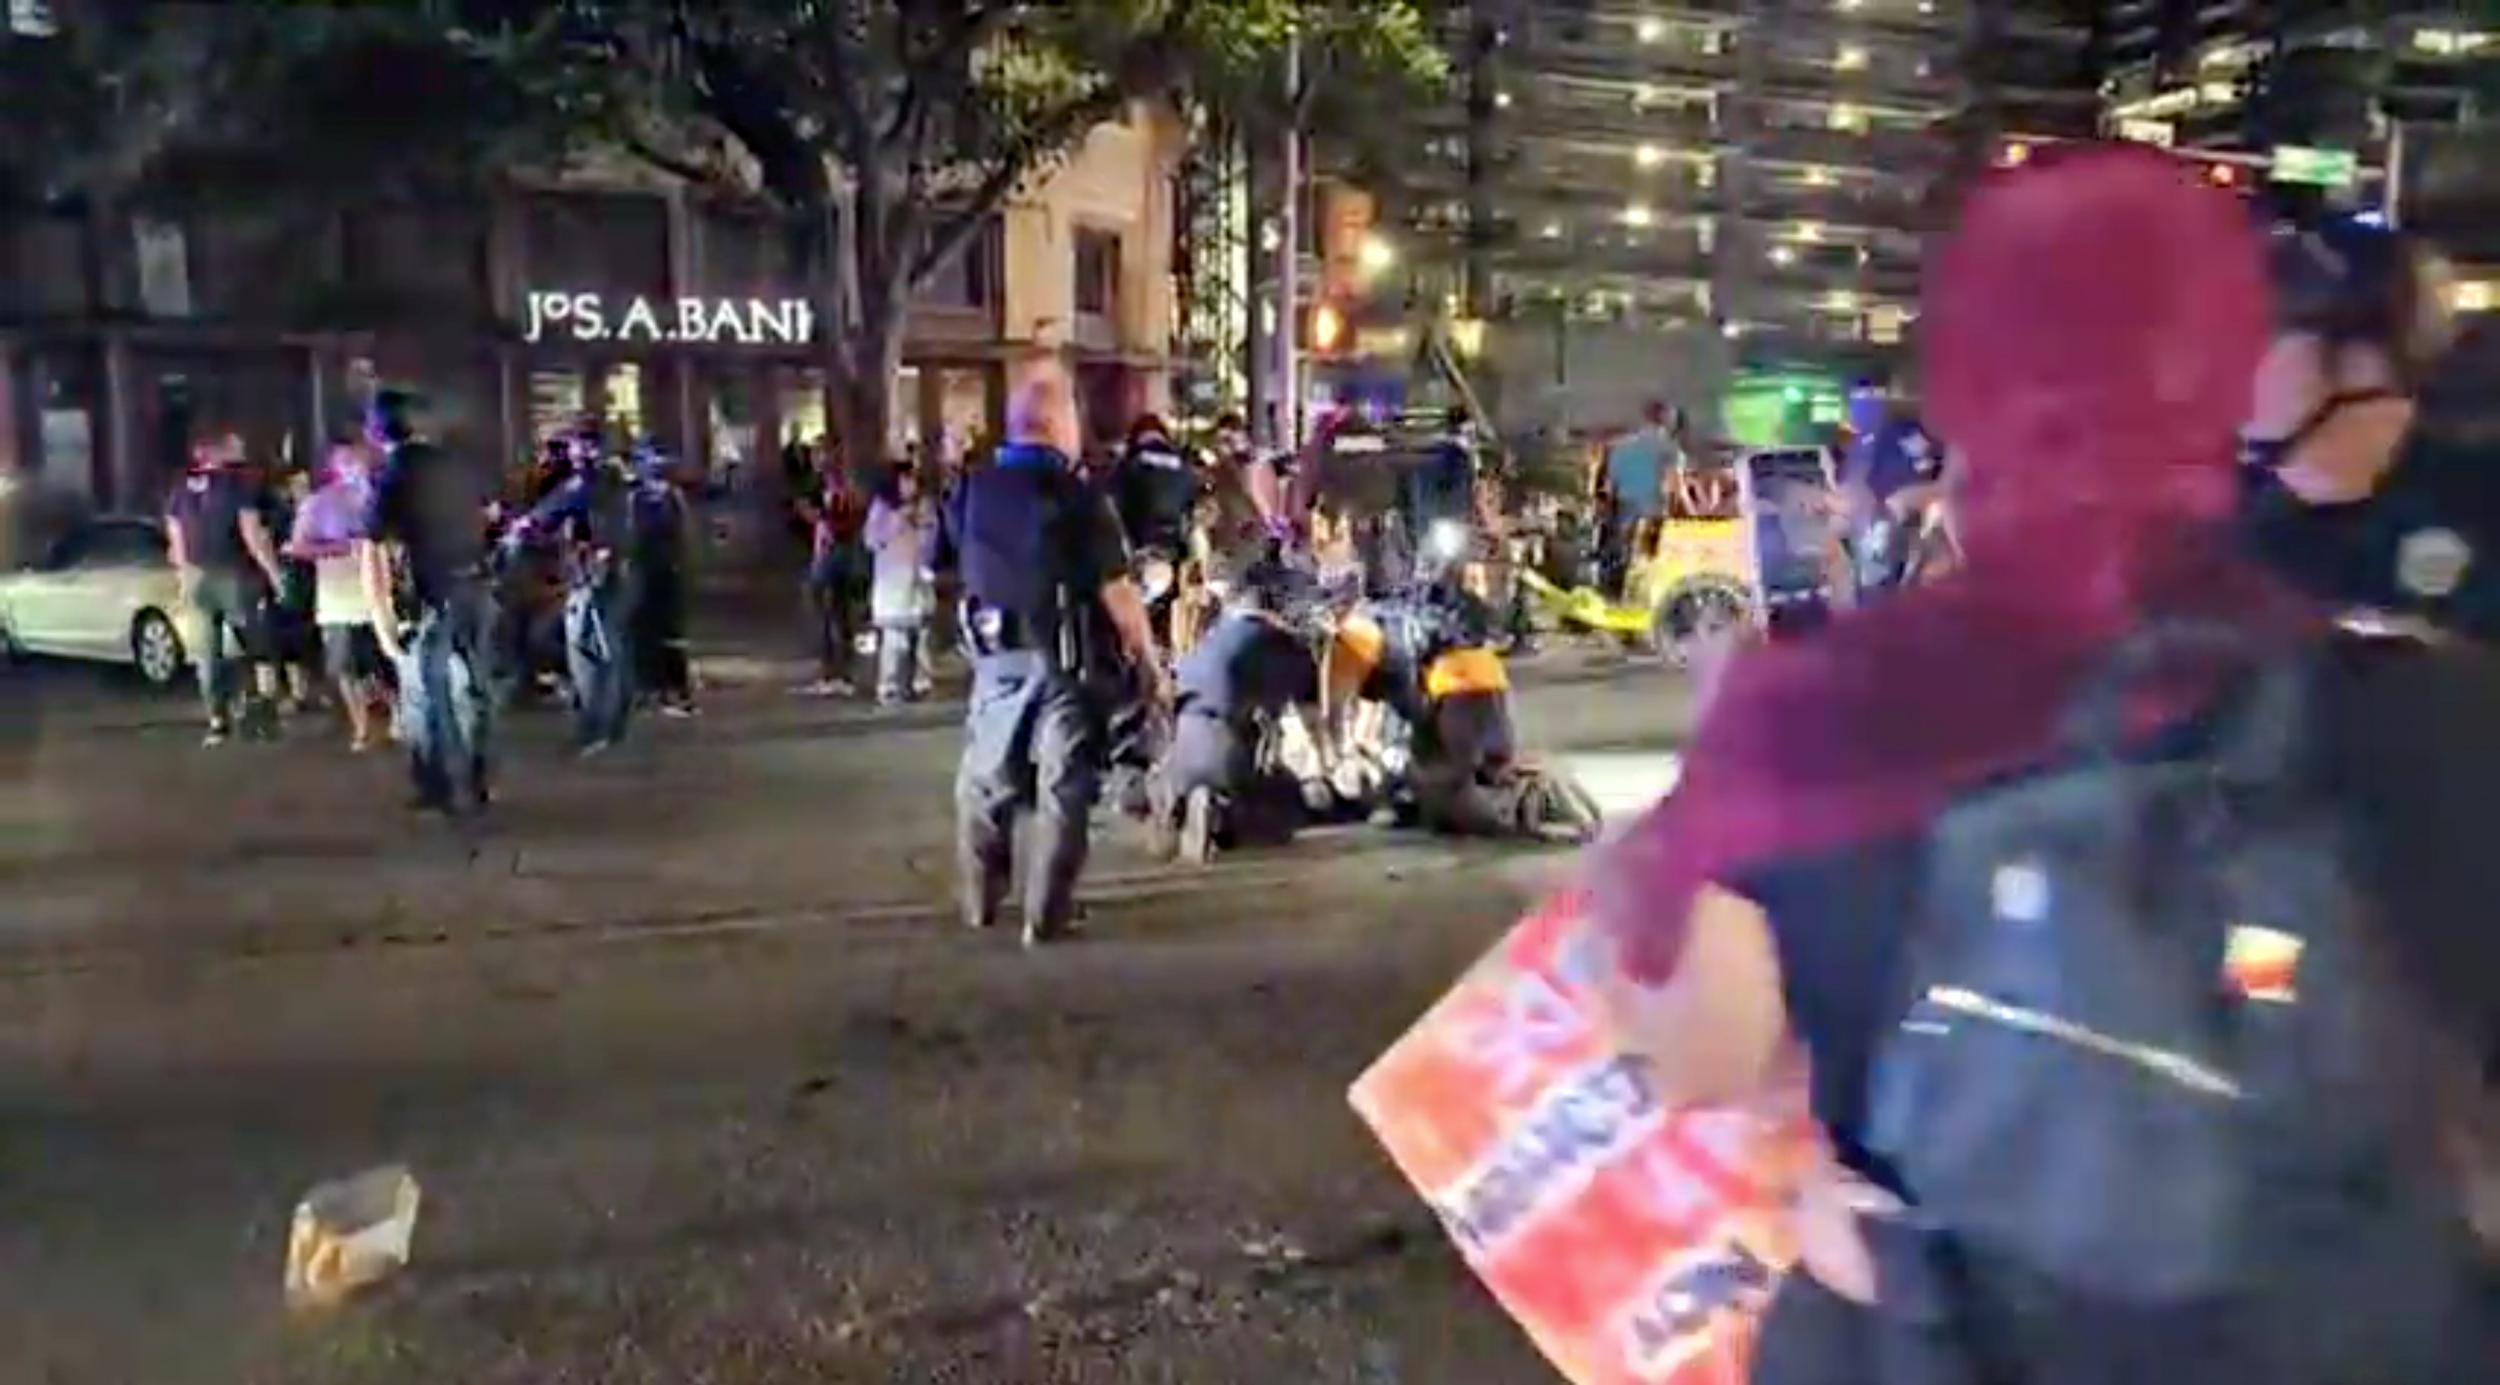 Driver shoots man dead during Texas protest, police say